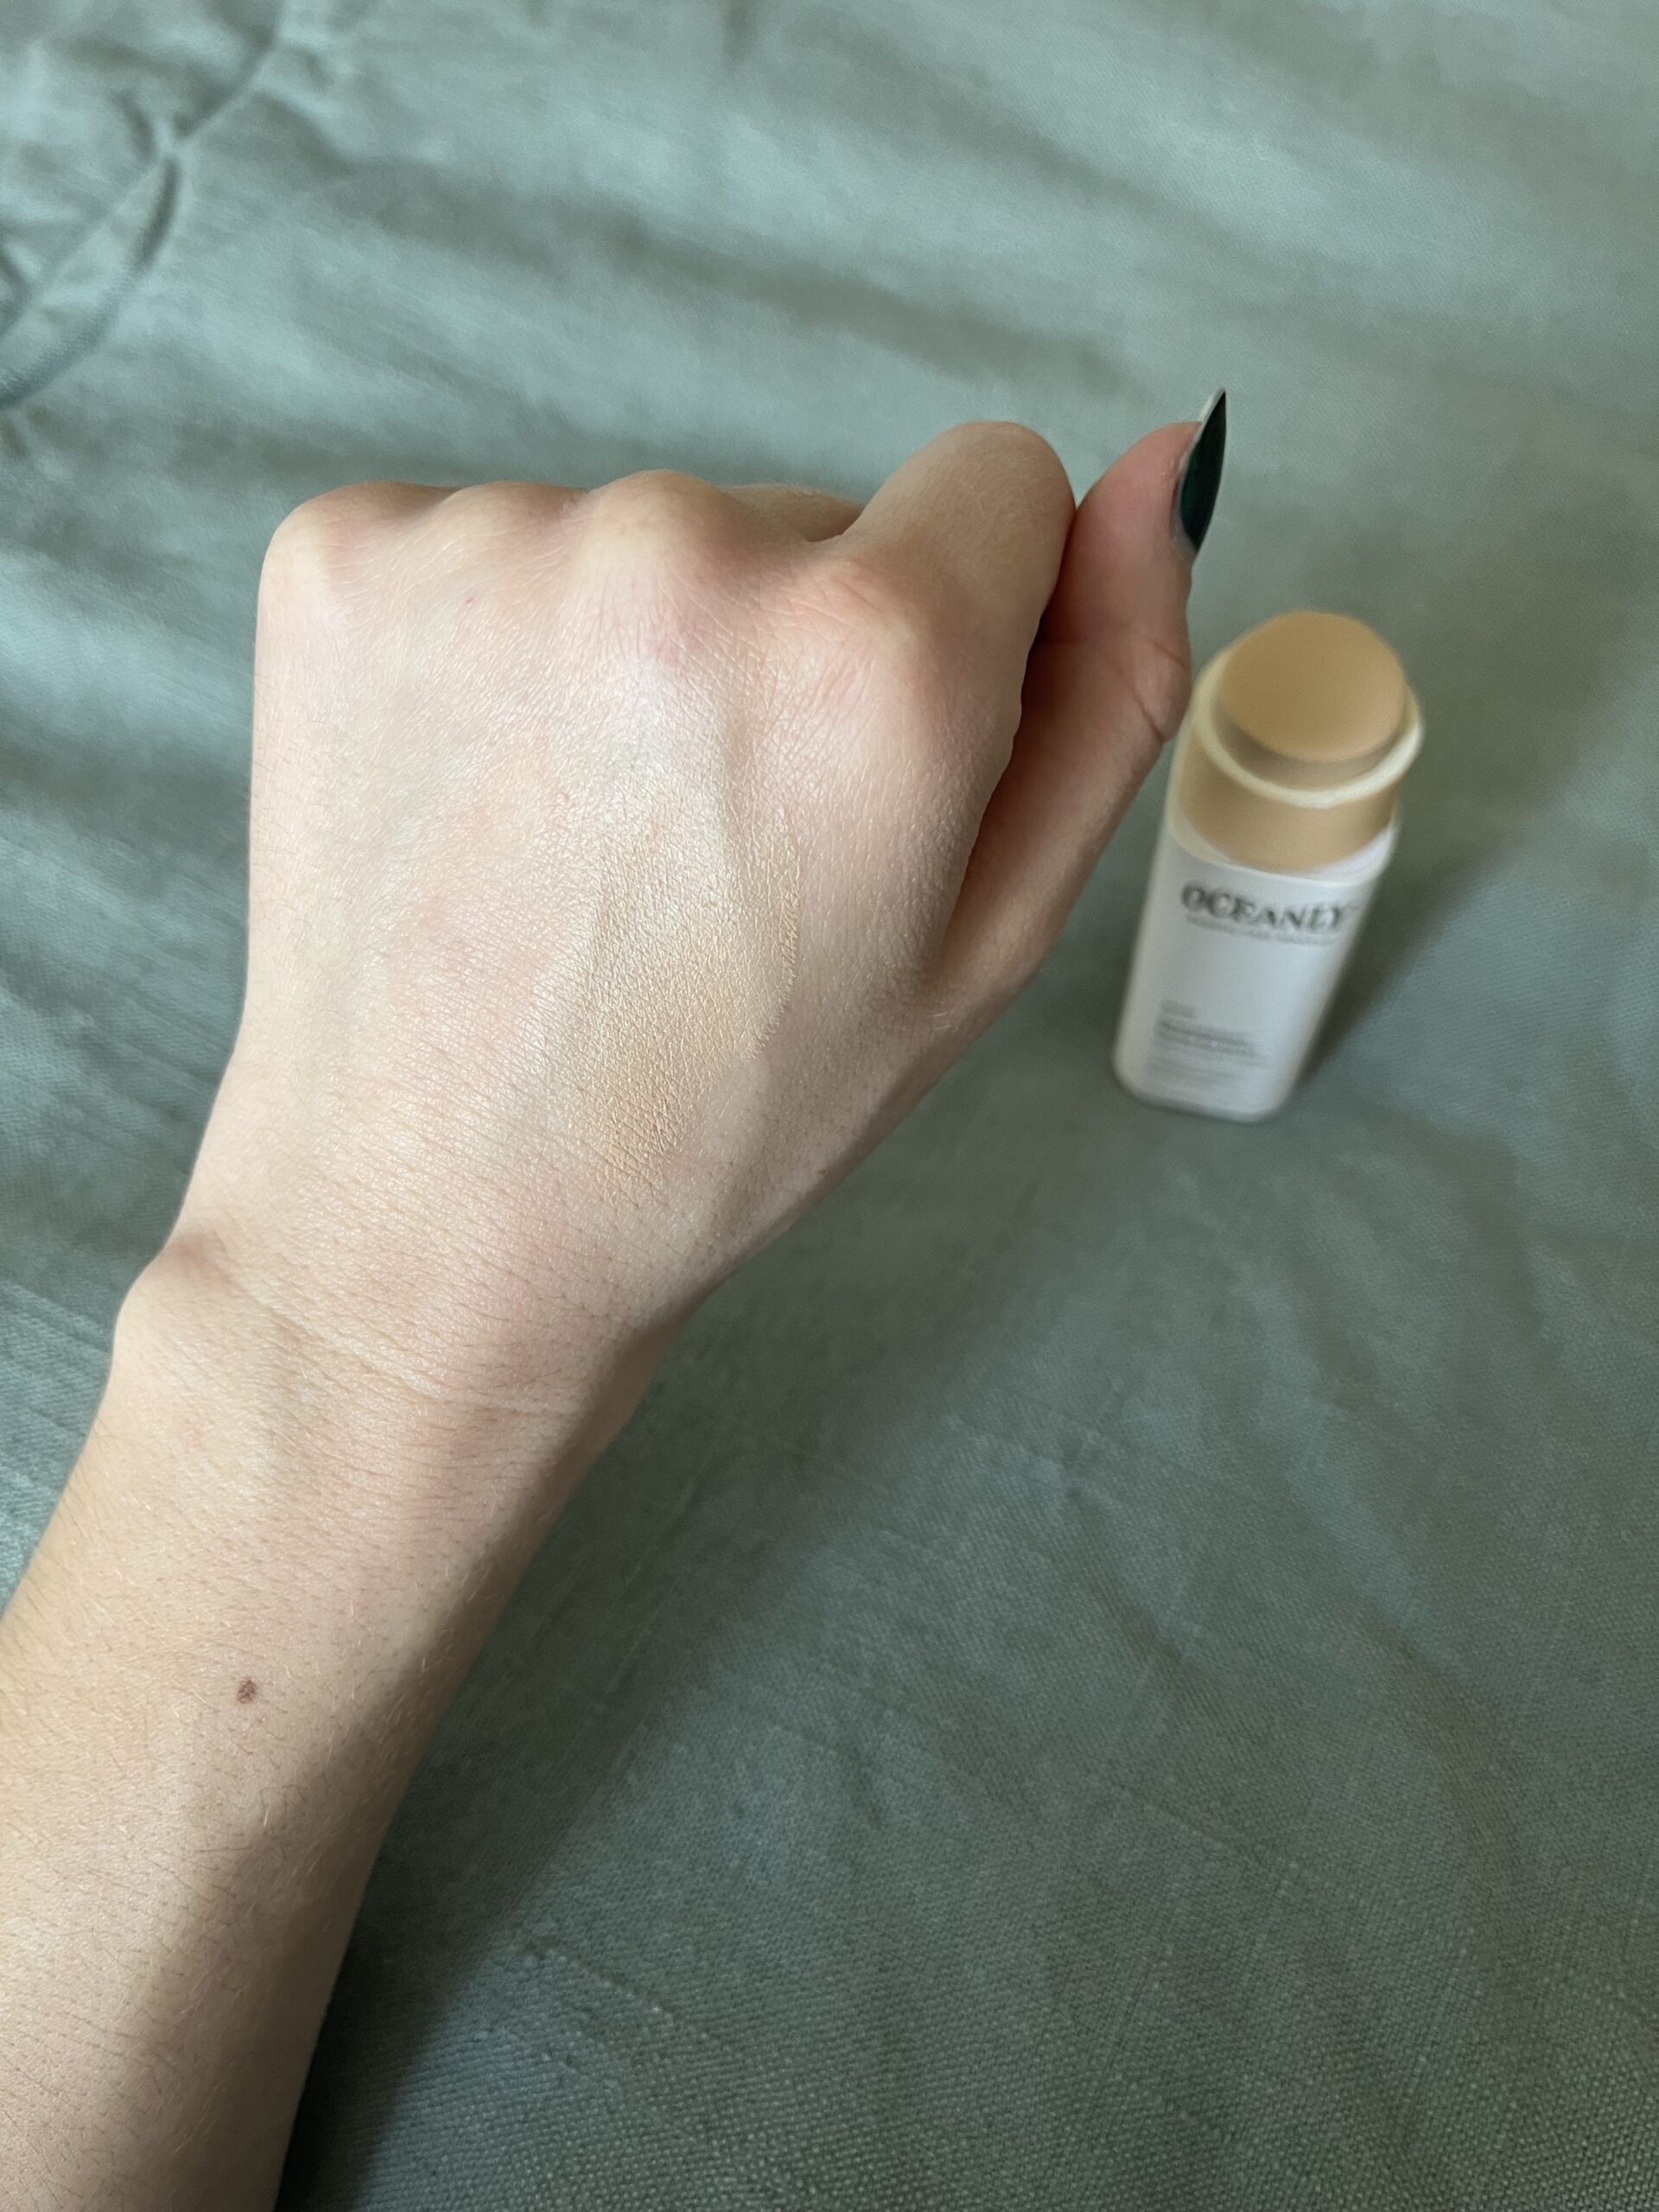 A person's hand showing a swatch of light beige foundation next to a small bottle of oceane makeup on a grey fabric surface.